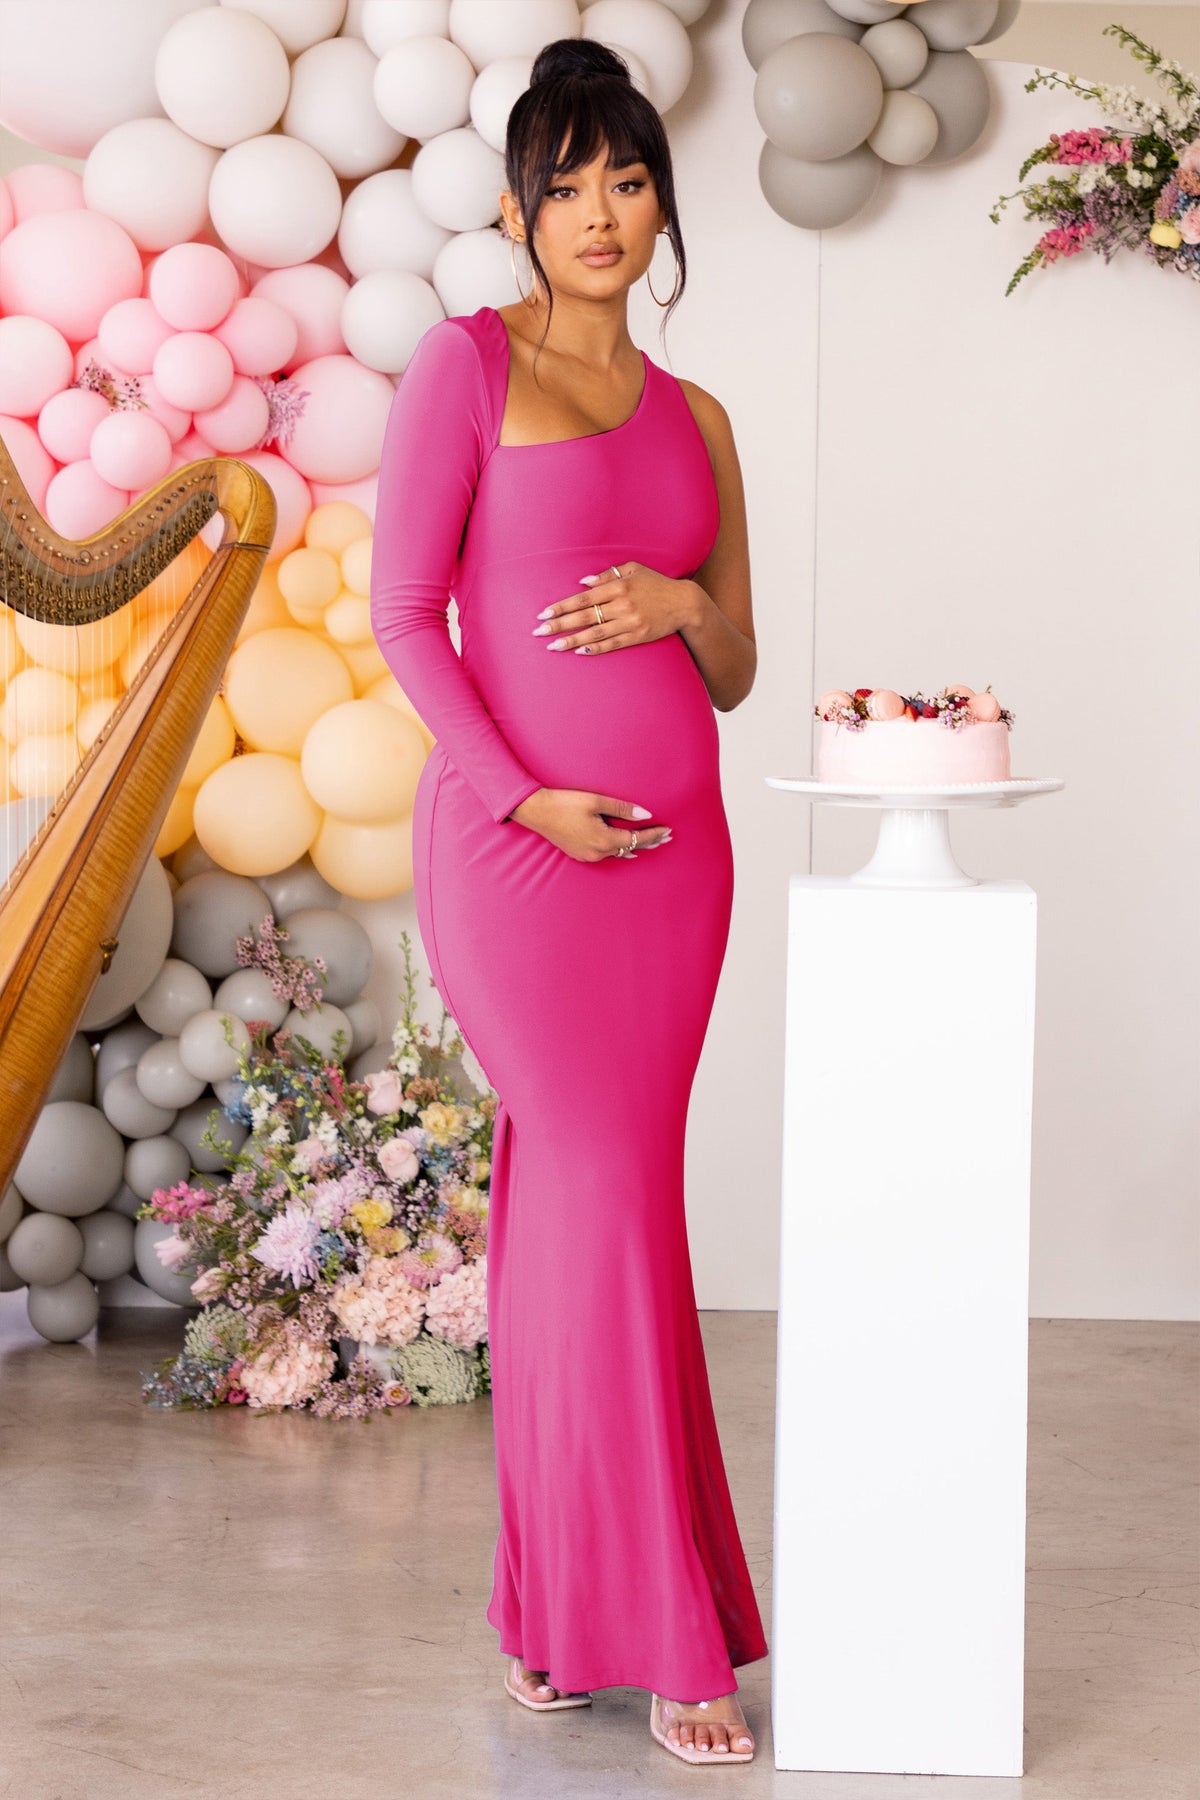 Oh Baby Hot Pink Maternity One Shoulder Bodycon Maxi Dress – Club L London  - USA